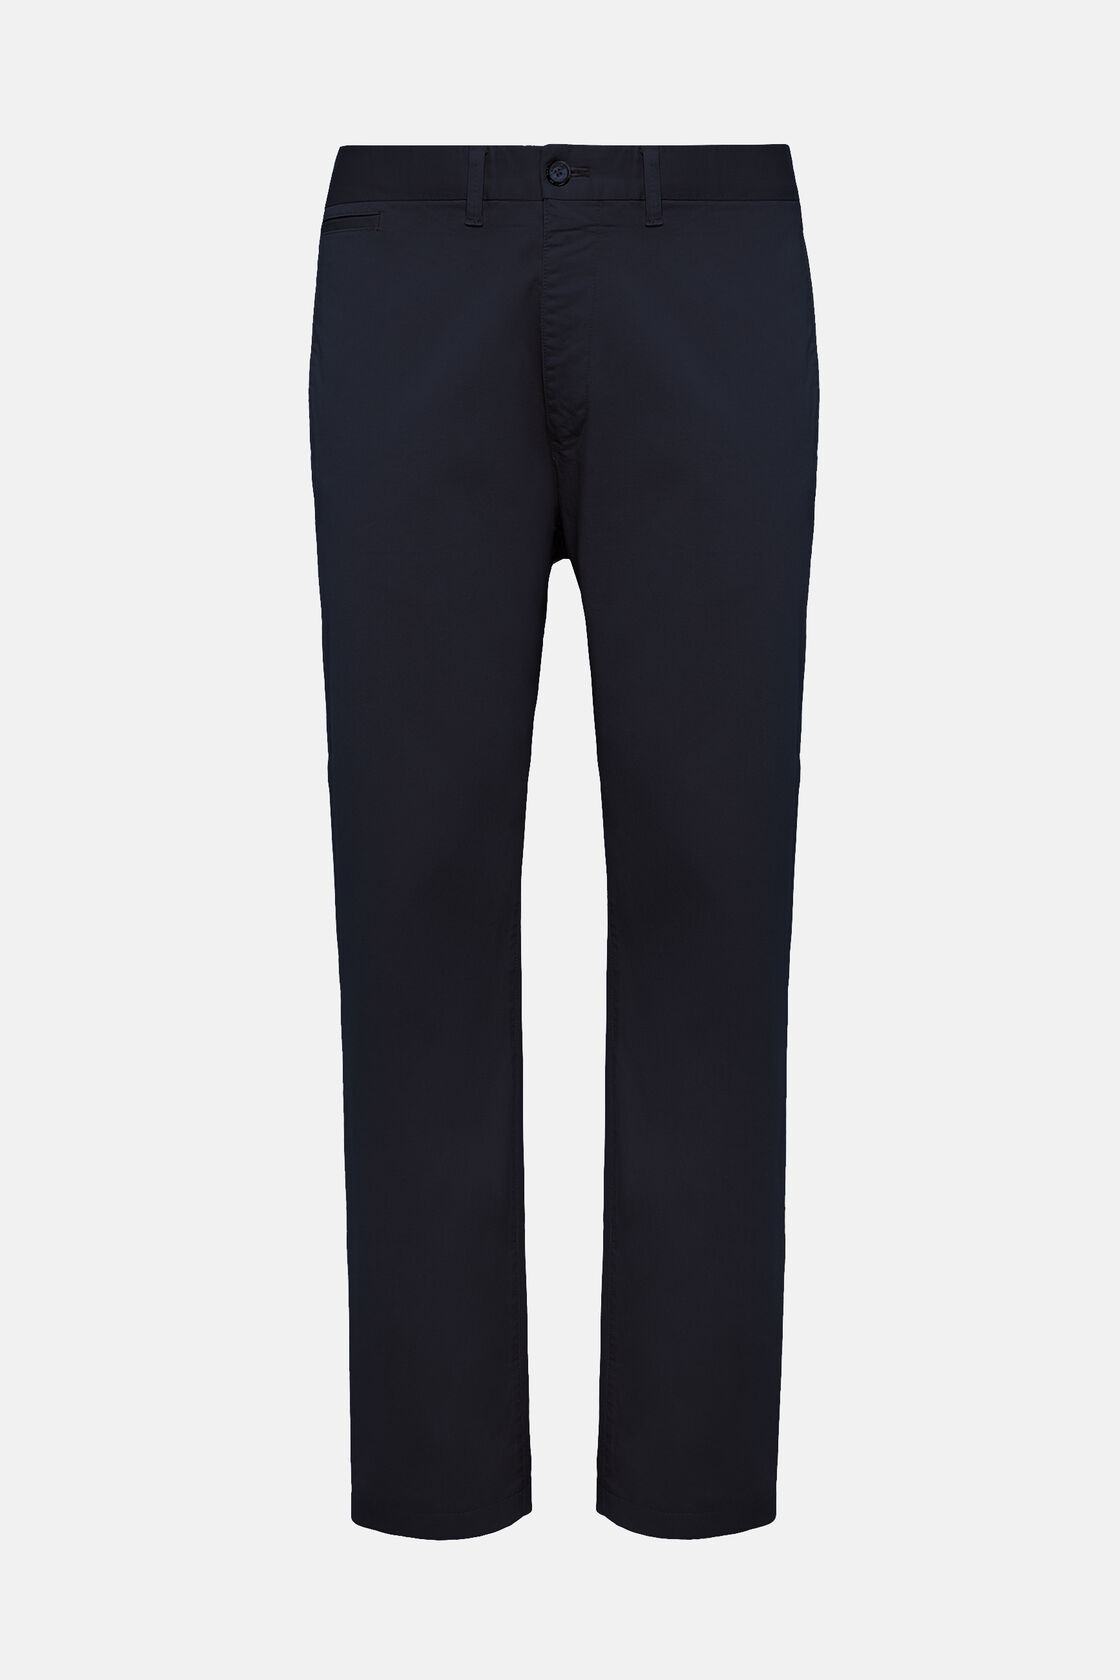 Stretch Cotton Trousers, Navy blue, hi-res